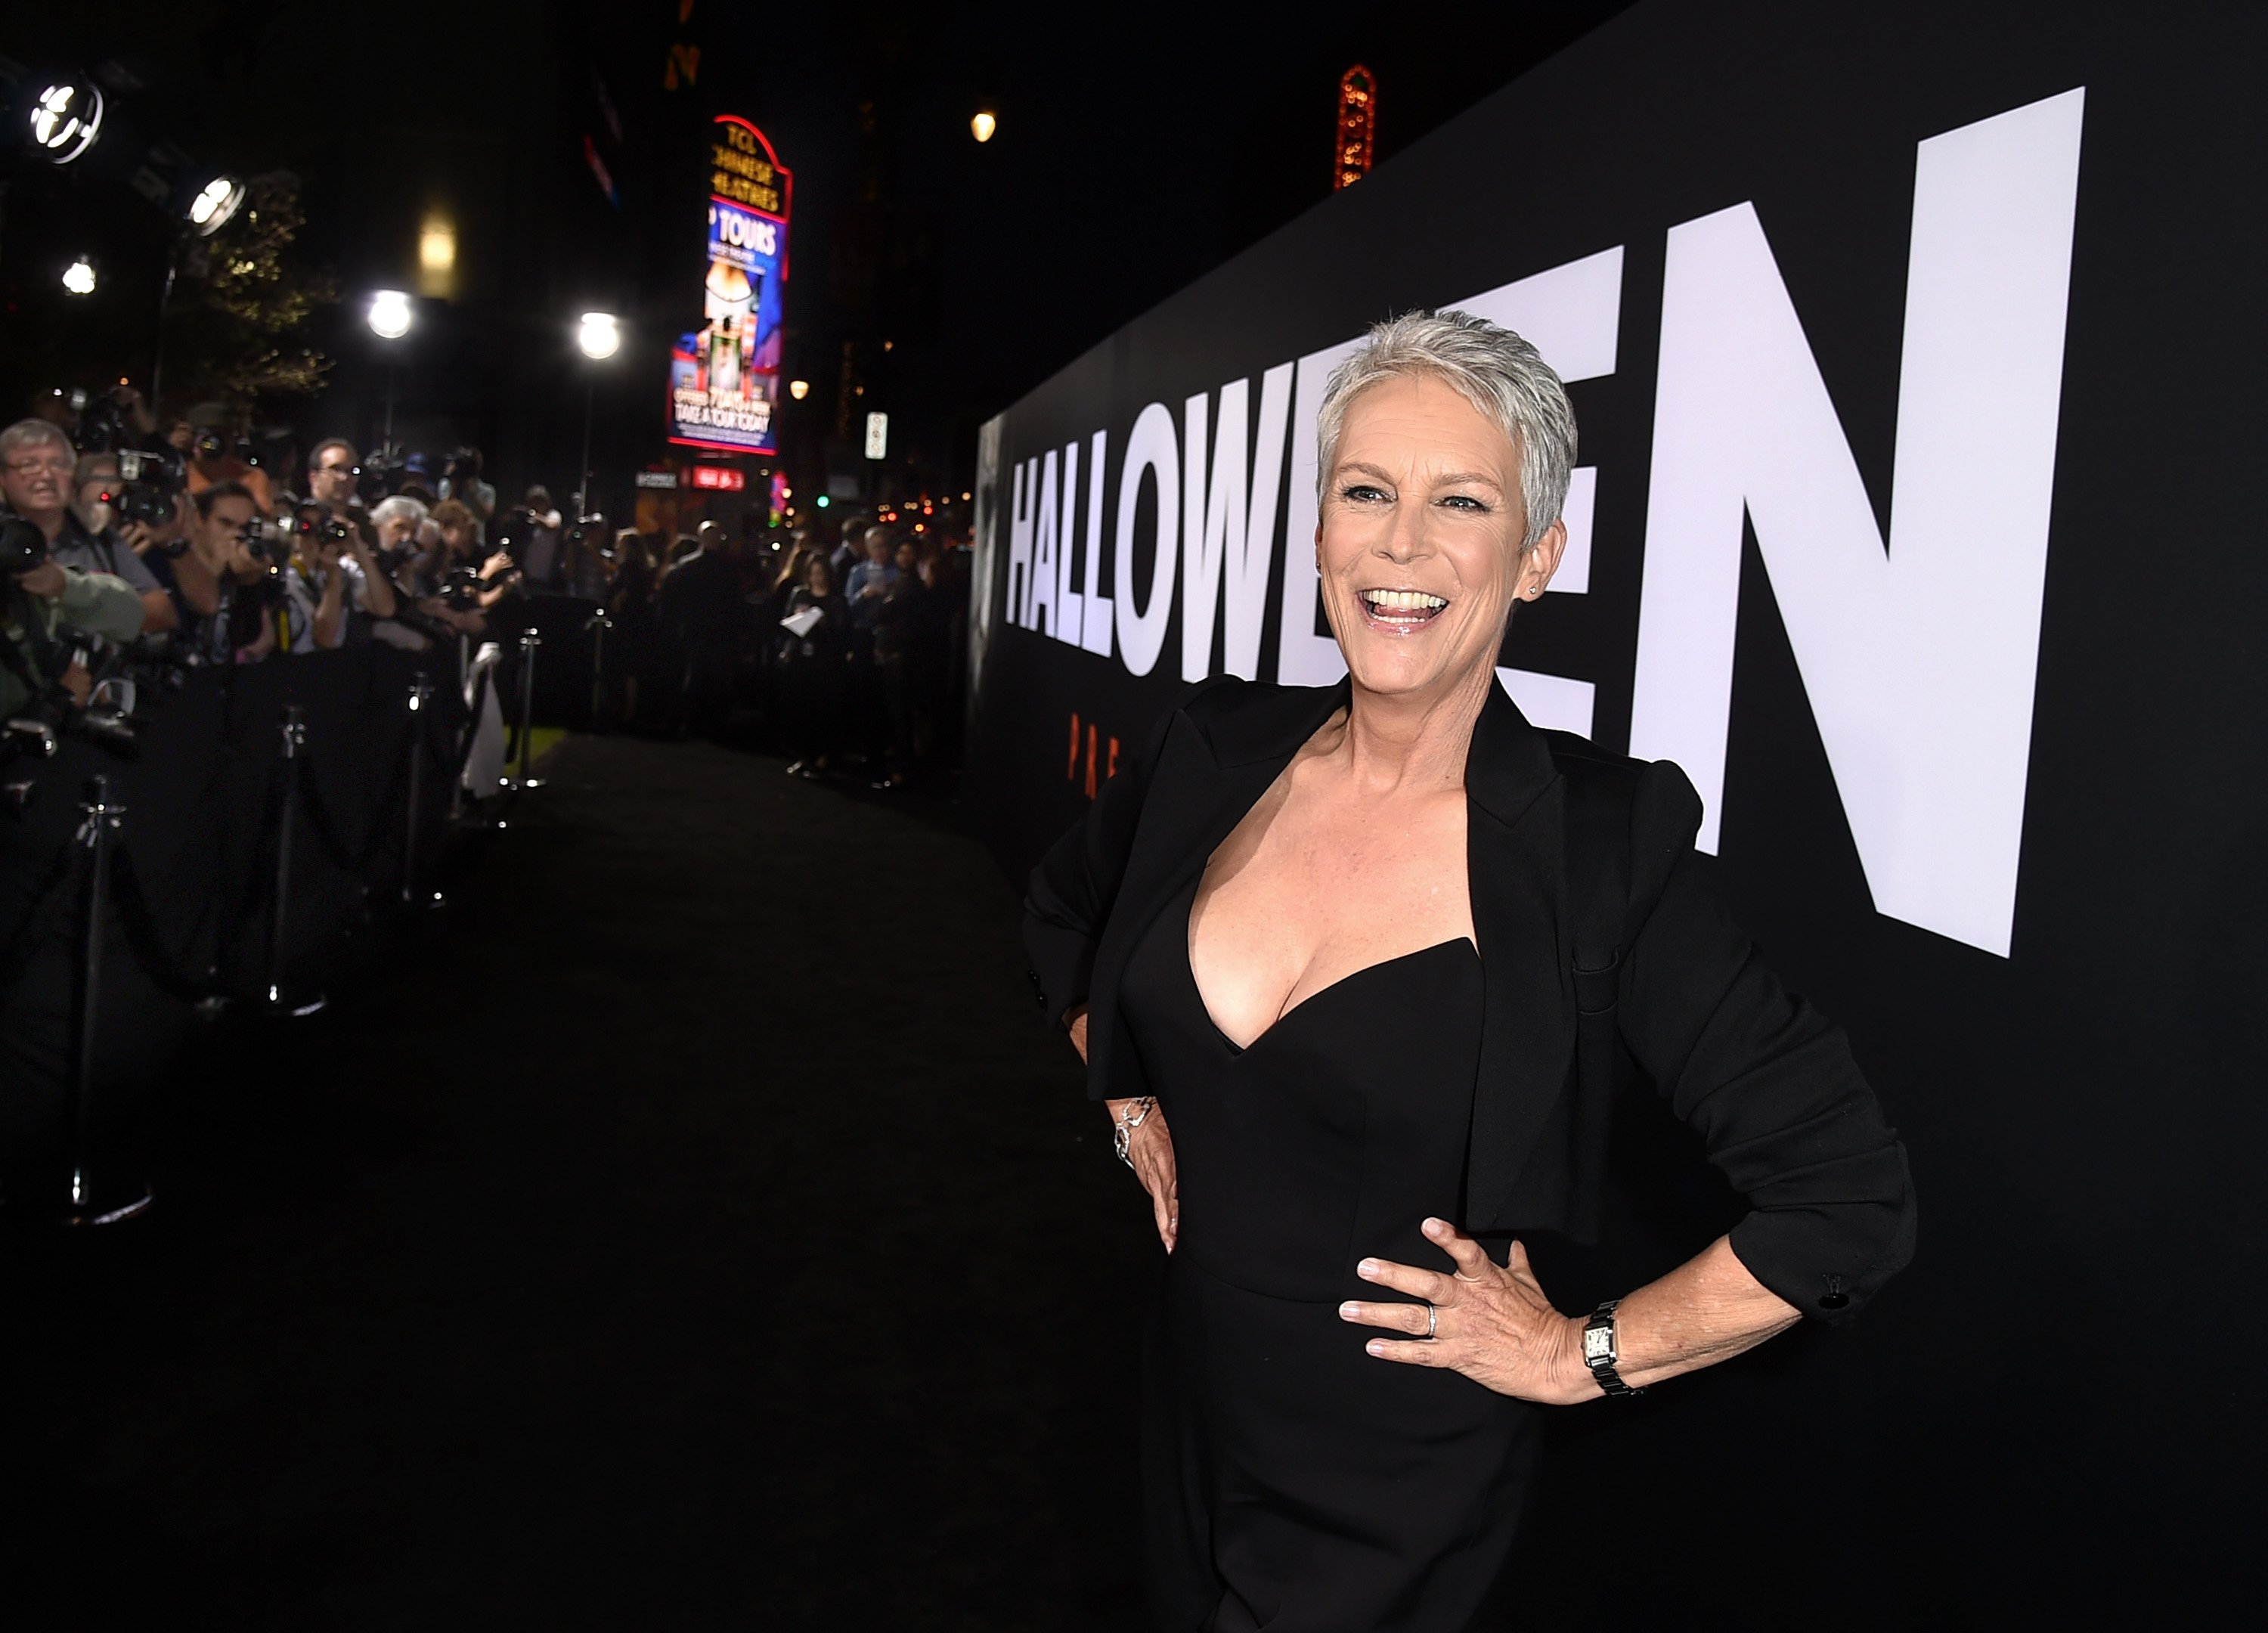 Jamie Lee Curtis arrives at the premiere of Universal Pictures' "Halloween" at the TCL Chinese Theatre on October 17, 2018. | Photo: Getty Images